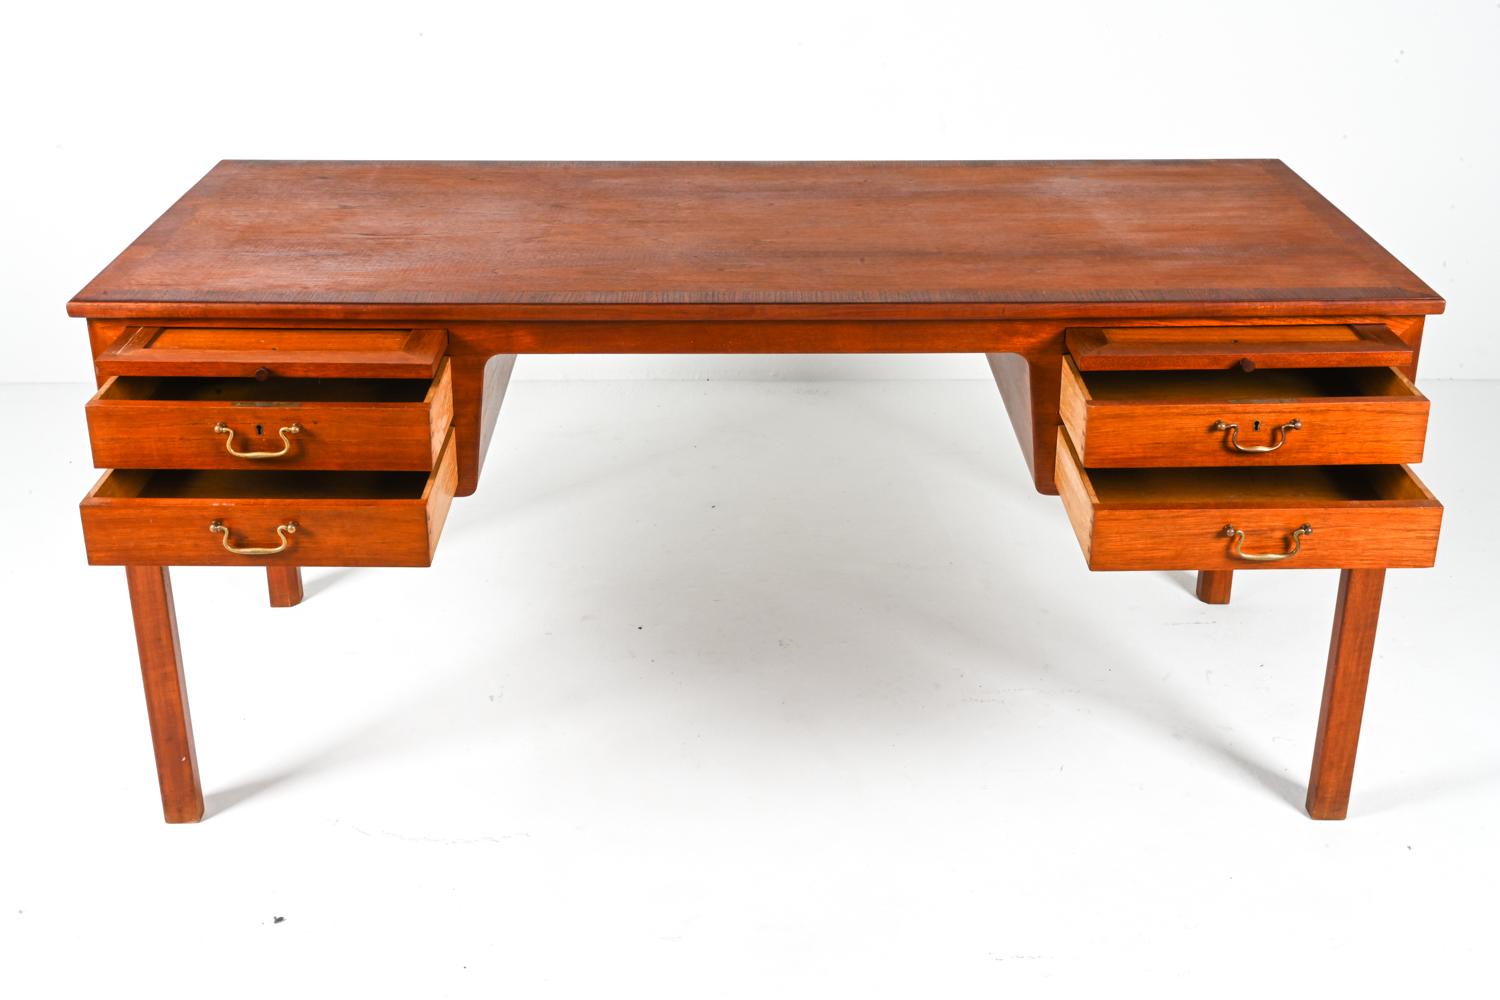 Wood Danish Mahogany Executive Writing Desk by Ole Wanscher, c. 1950's For Sale